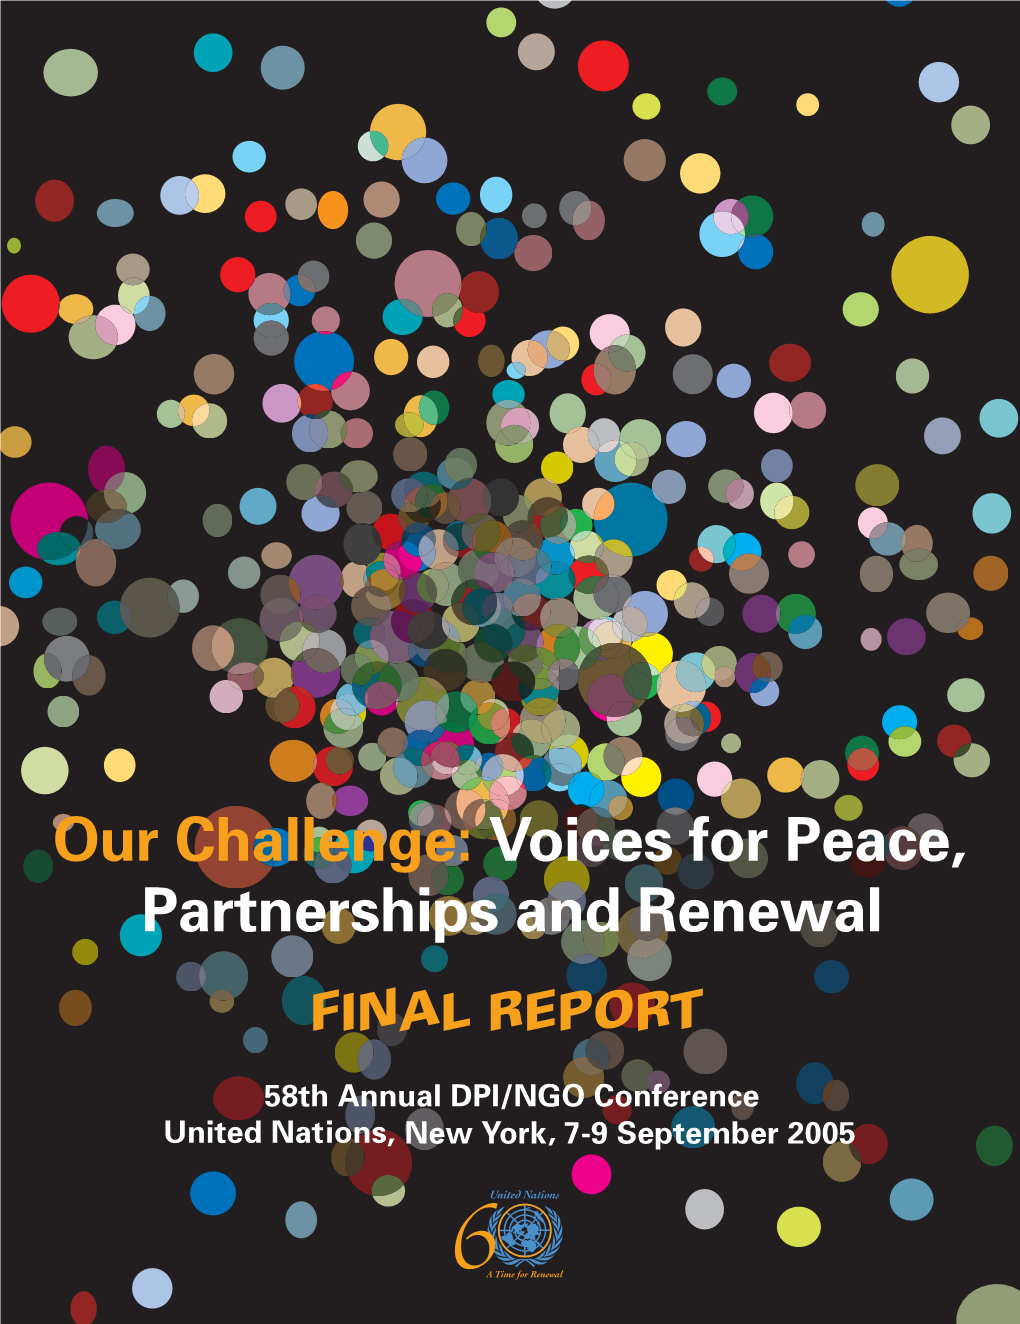 United Nations and Civil Society and Highlighted Their Demand That Civil Society Voices Be Heard and Heeded at the United Nations Deliberations